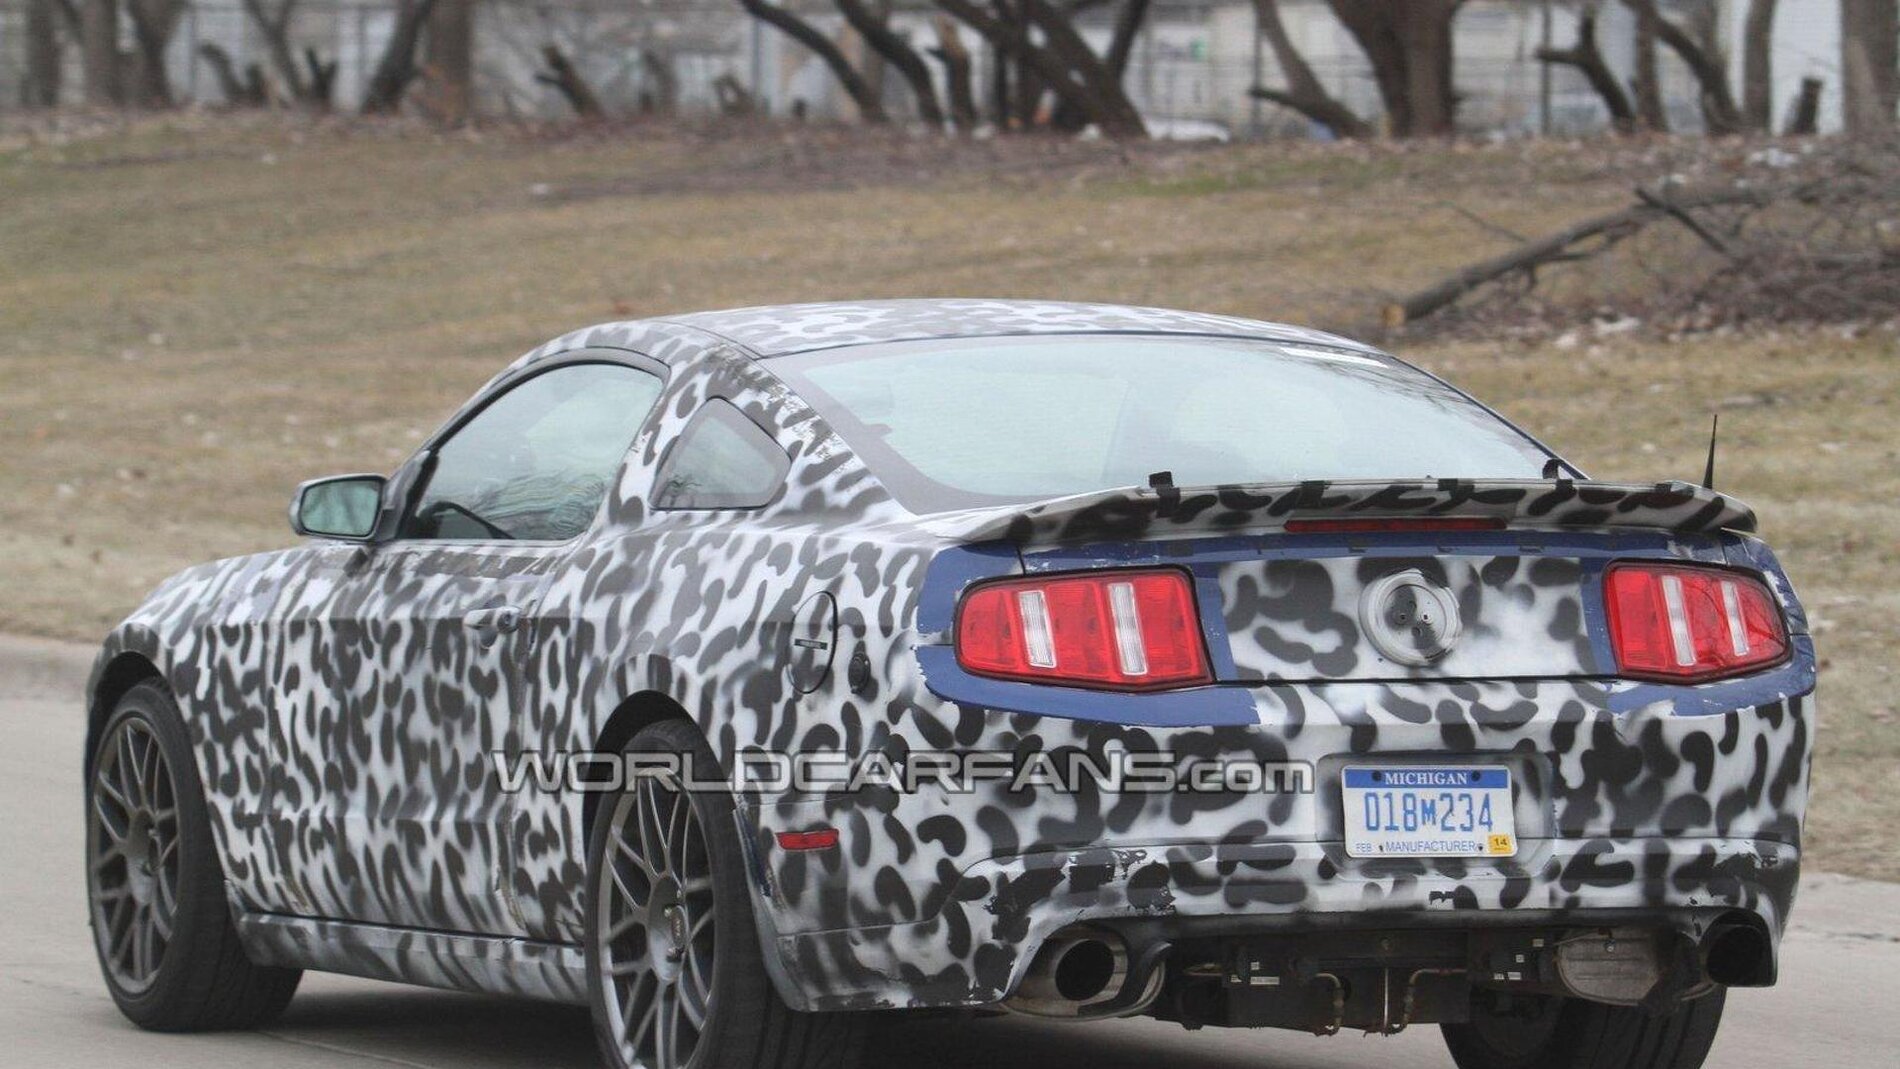 S650 Mustang S650 mule spotted..........with all wheel drive? B3E88A49-0461-4D40-ACA4-55ABDA514B72